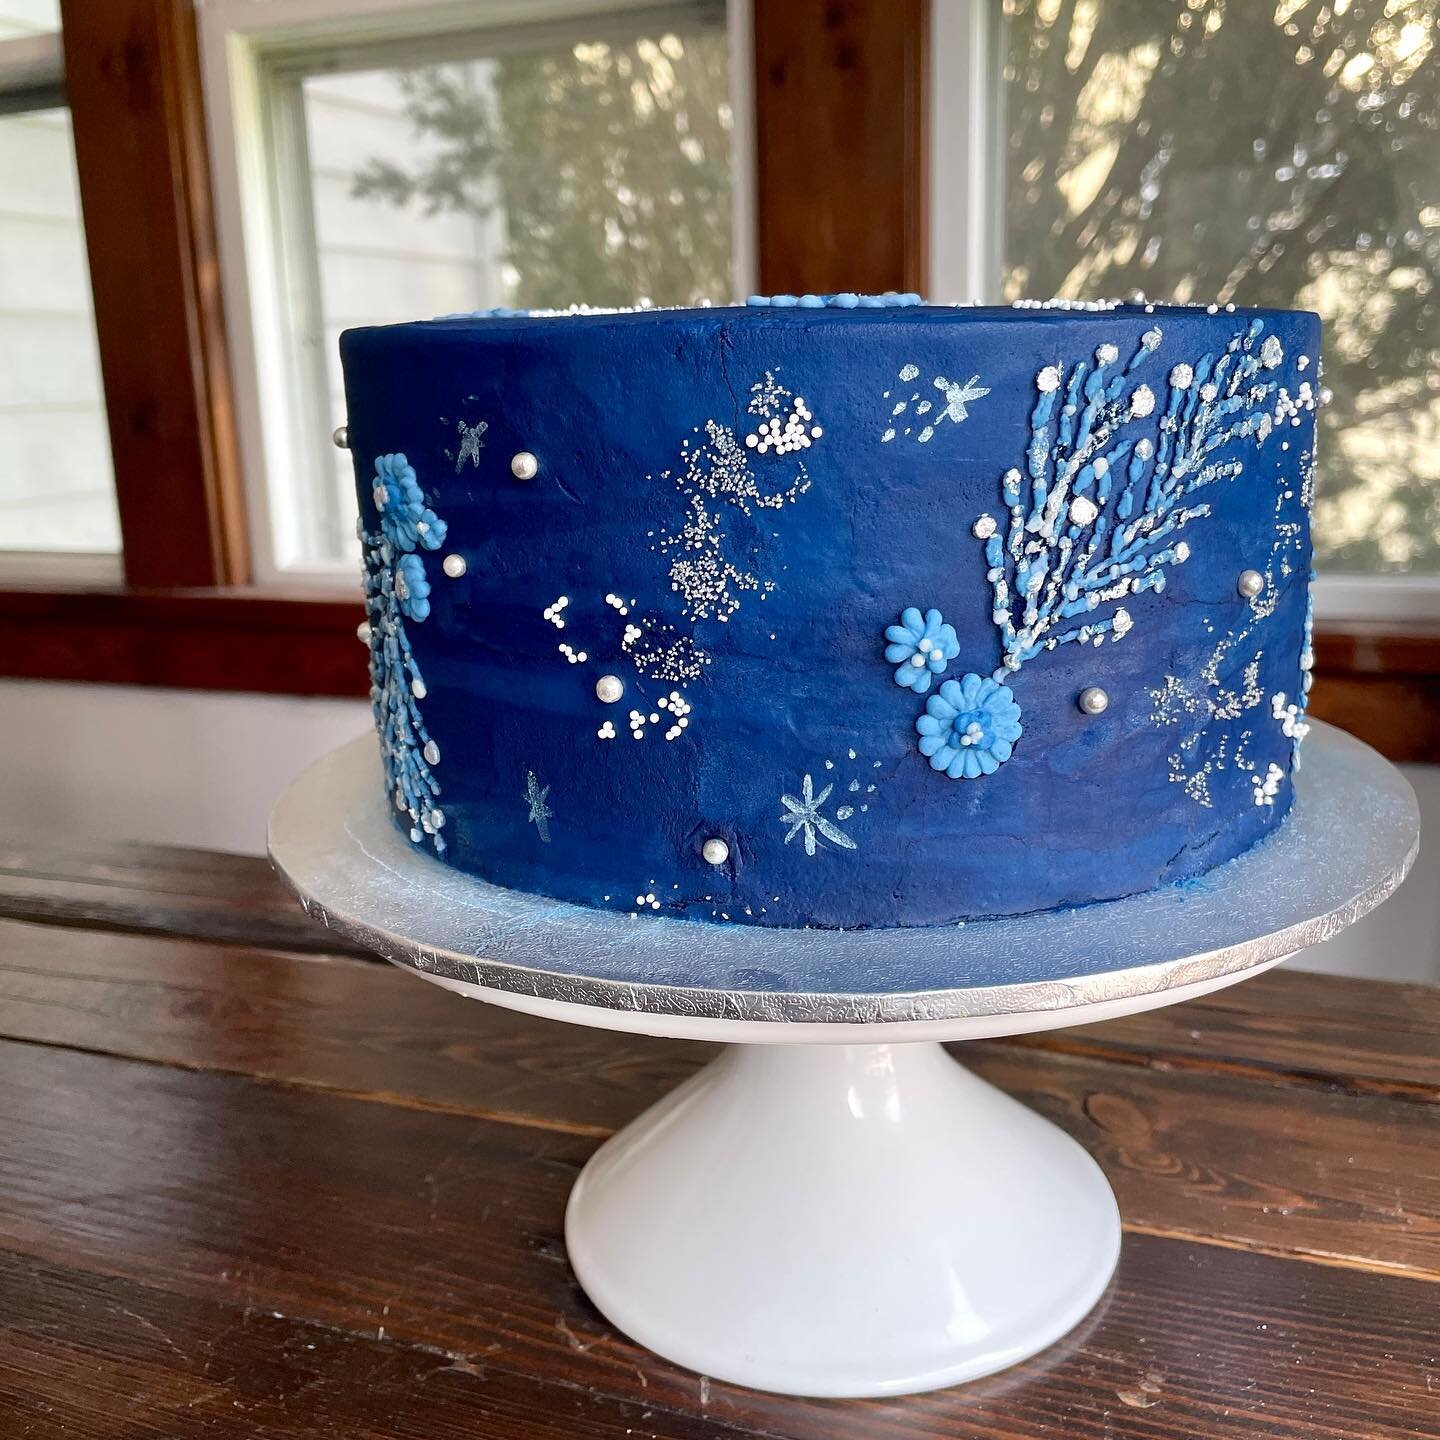 the cake &amp; the inspo based on the brides dress for a constellation bridal shower💙✨